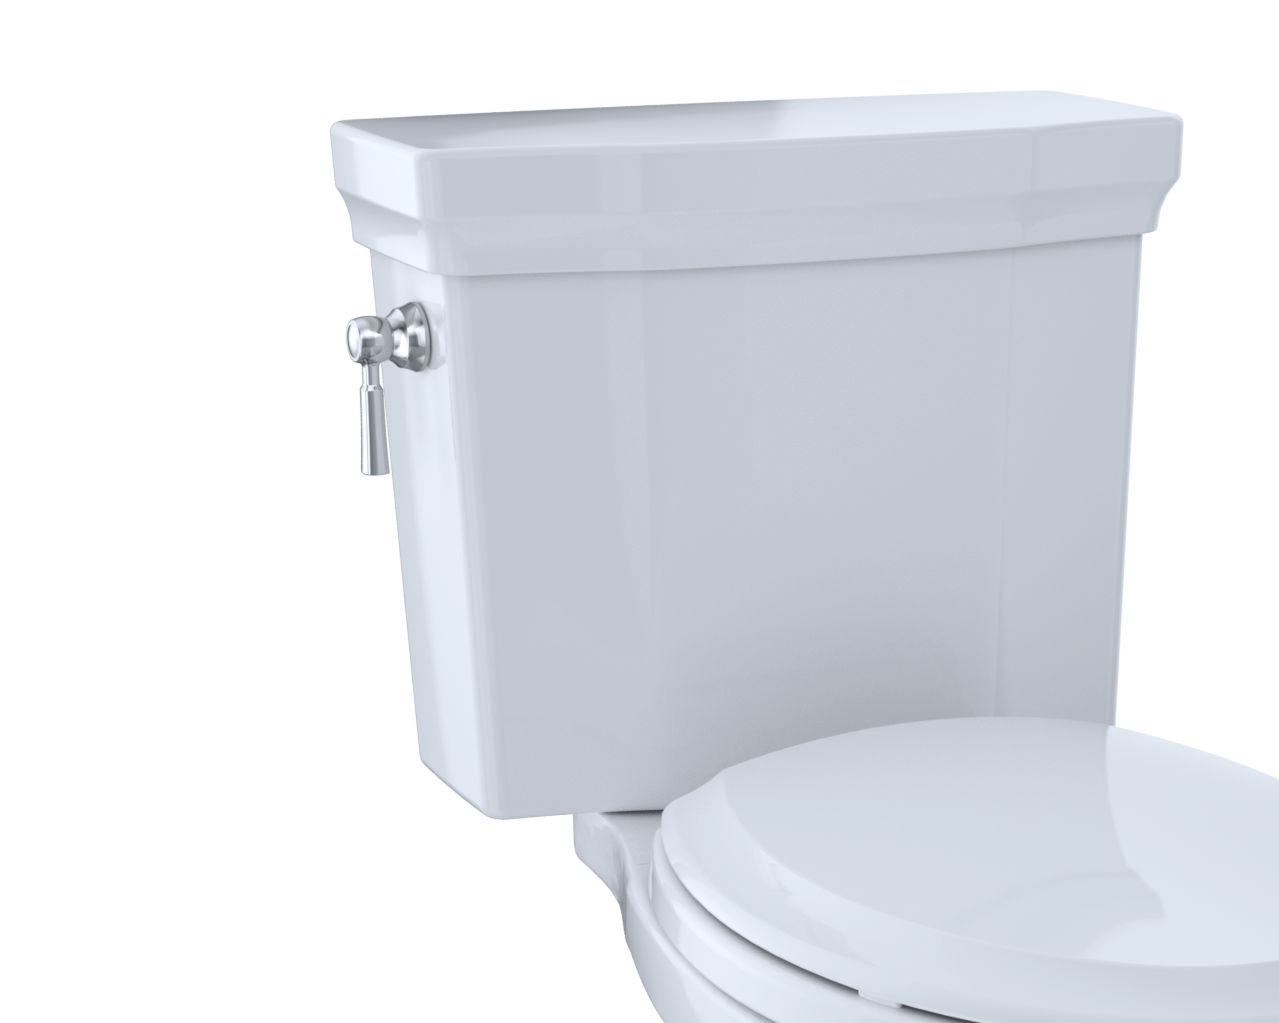 TOTO ST403UR#01 PROMENADE II 1G 1.0 GPF TOILET TANK WITH RIGHT-HAND TRIP LEVER, COTTON WHITE